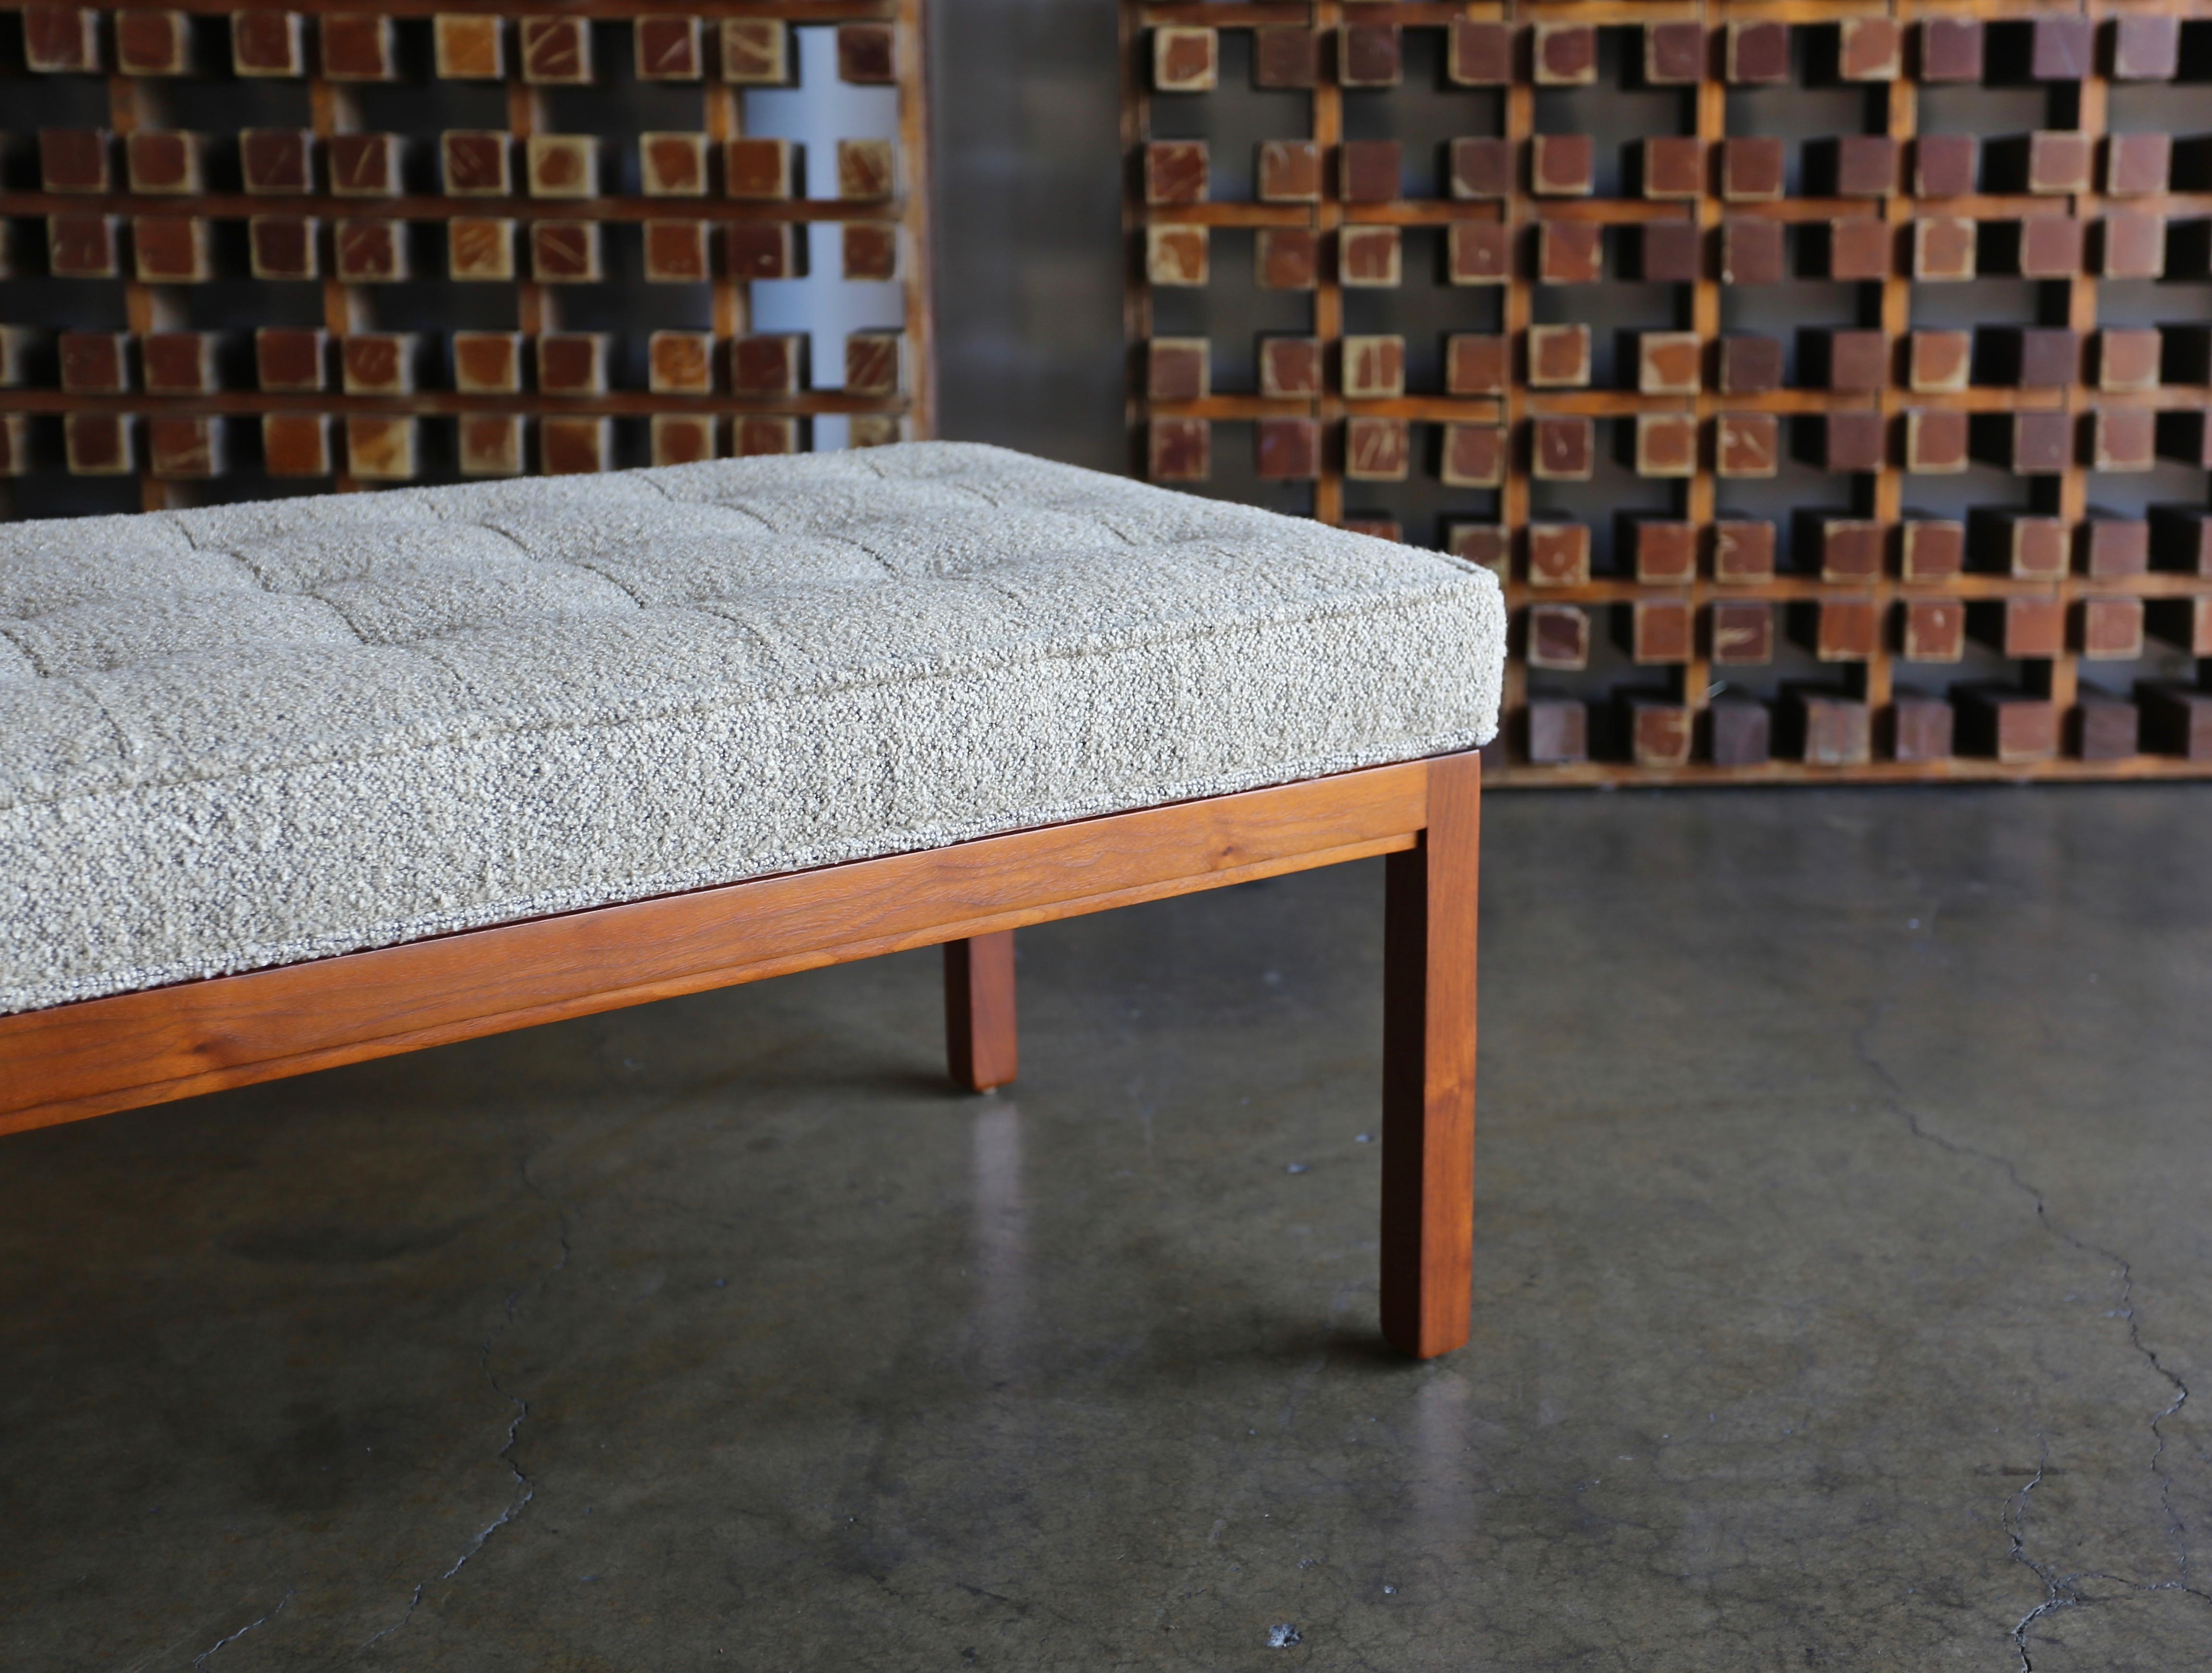 20th Century Tufted Nubby Fabric and Walnut Bench by Metropolitan Furniture Co.